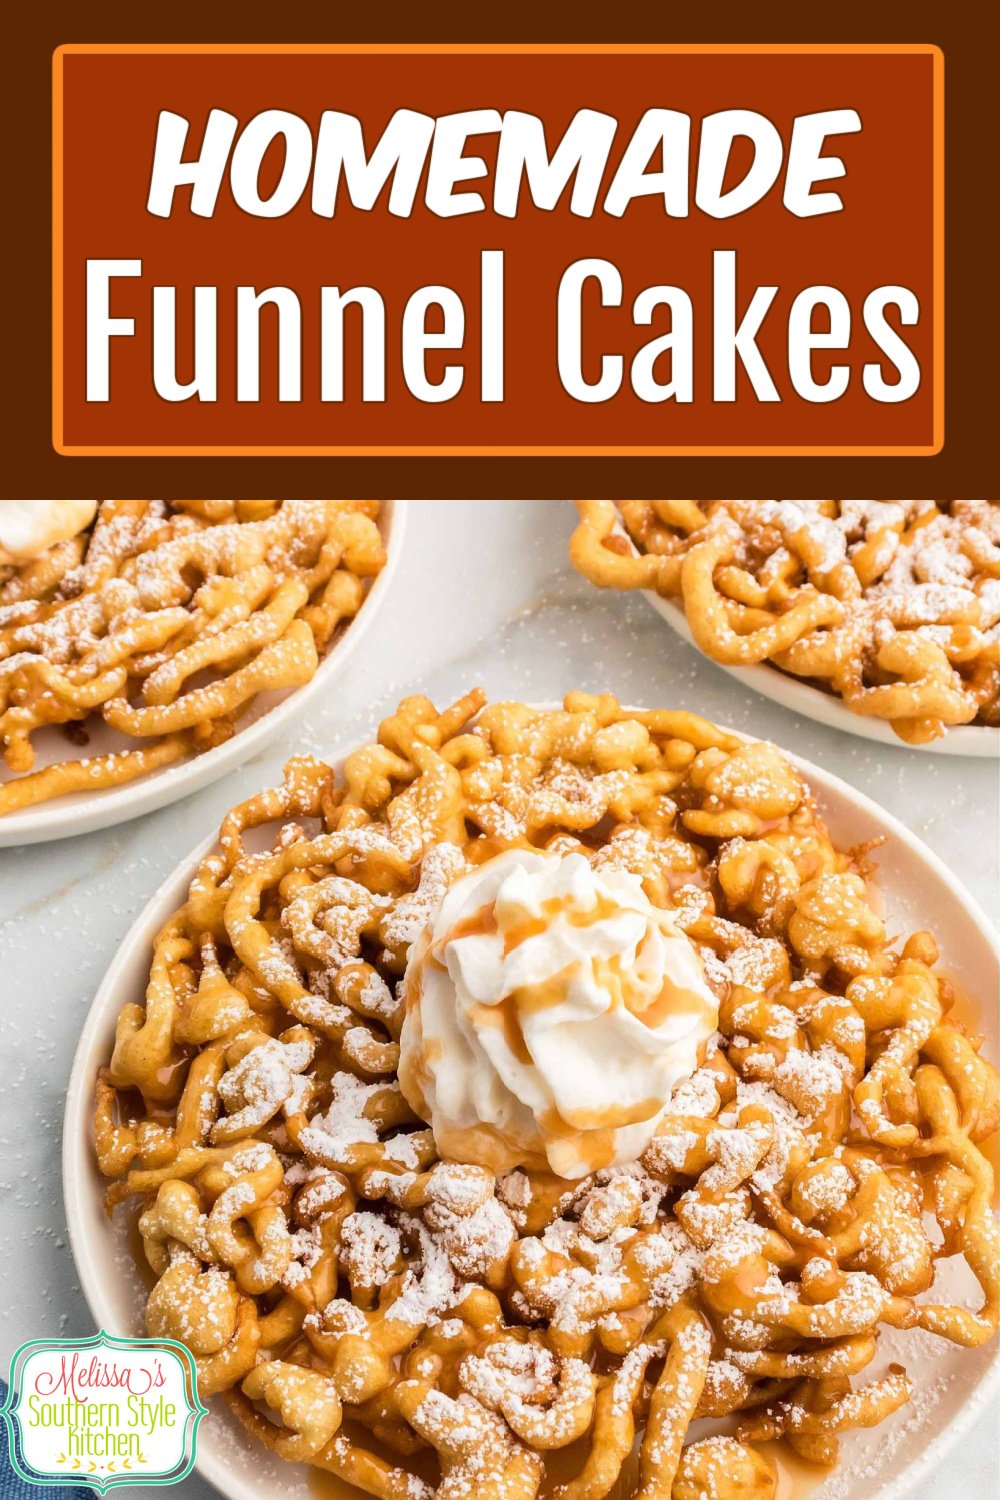 Treat the family to crispy Homemade Funnel Cakes dusted with powdered sugar, drizzled with syrup or topped with whipped cream and berries #funnelcakes #funnelcakerecipes #funnelcakes #southernstyle #southerndesserts #desserts #dessertfoodrecipes #fairfood #streetfood via @melissasssk